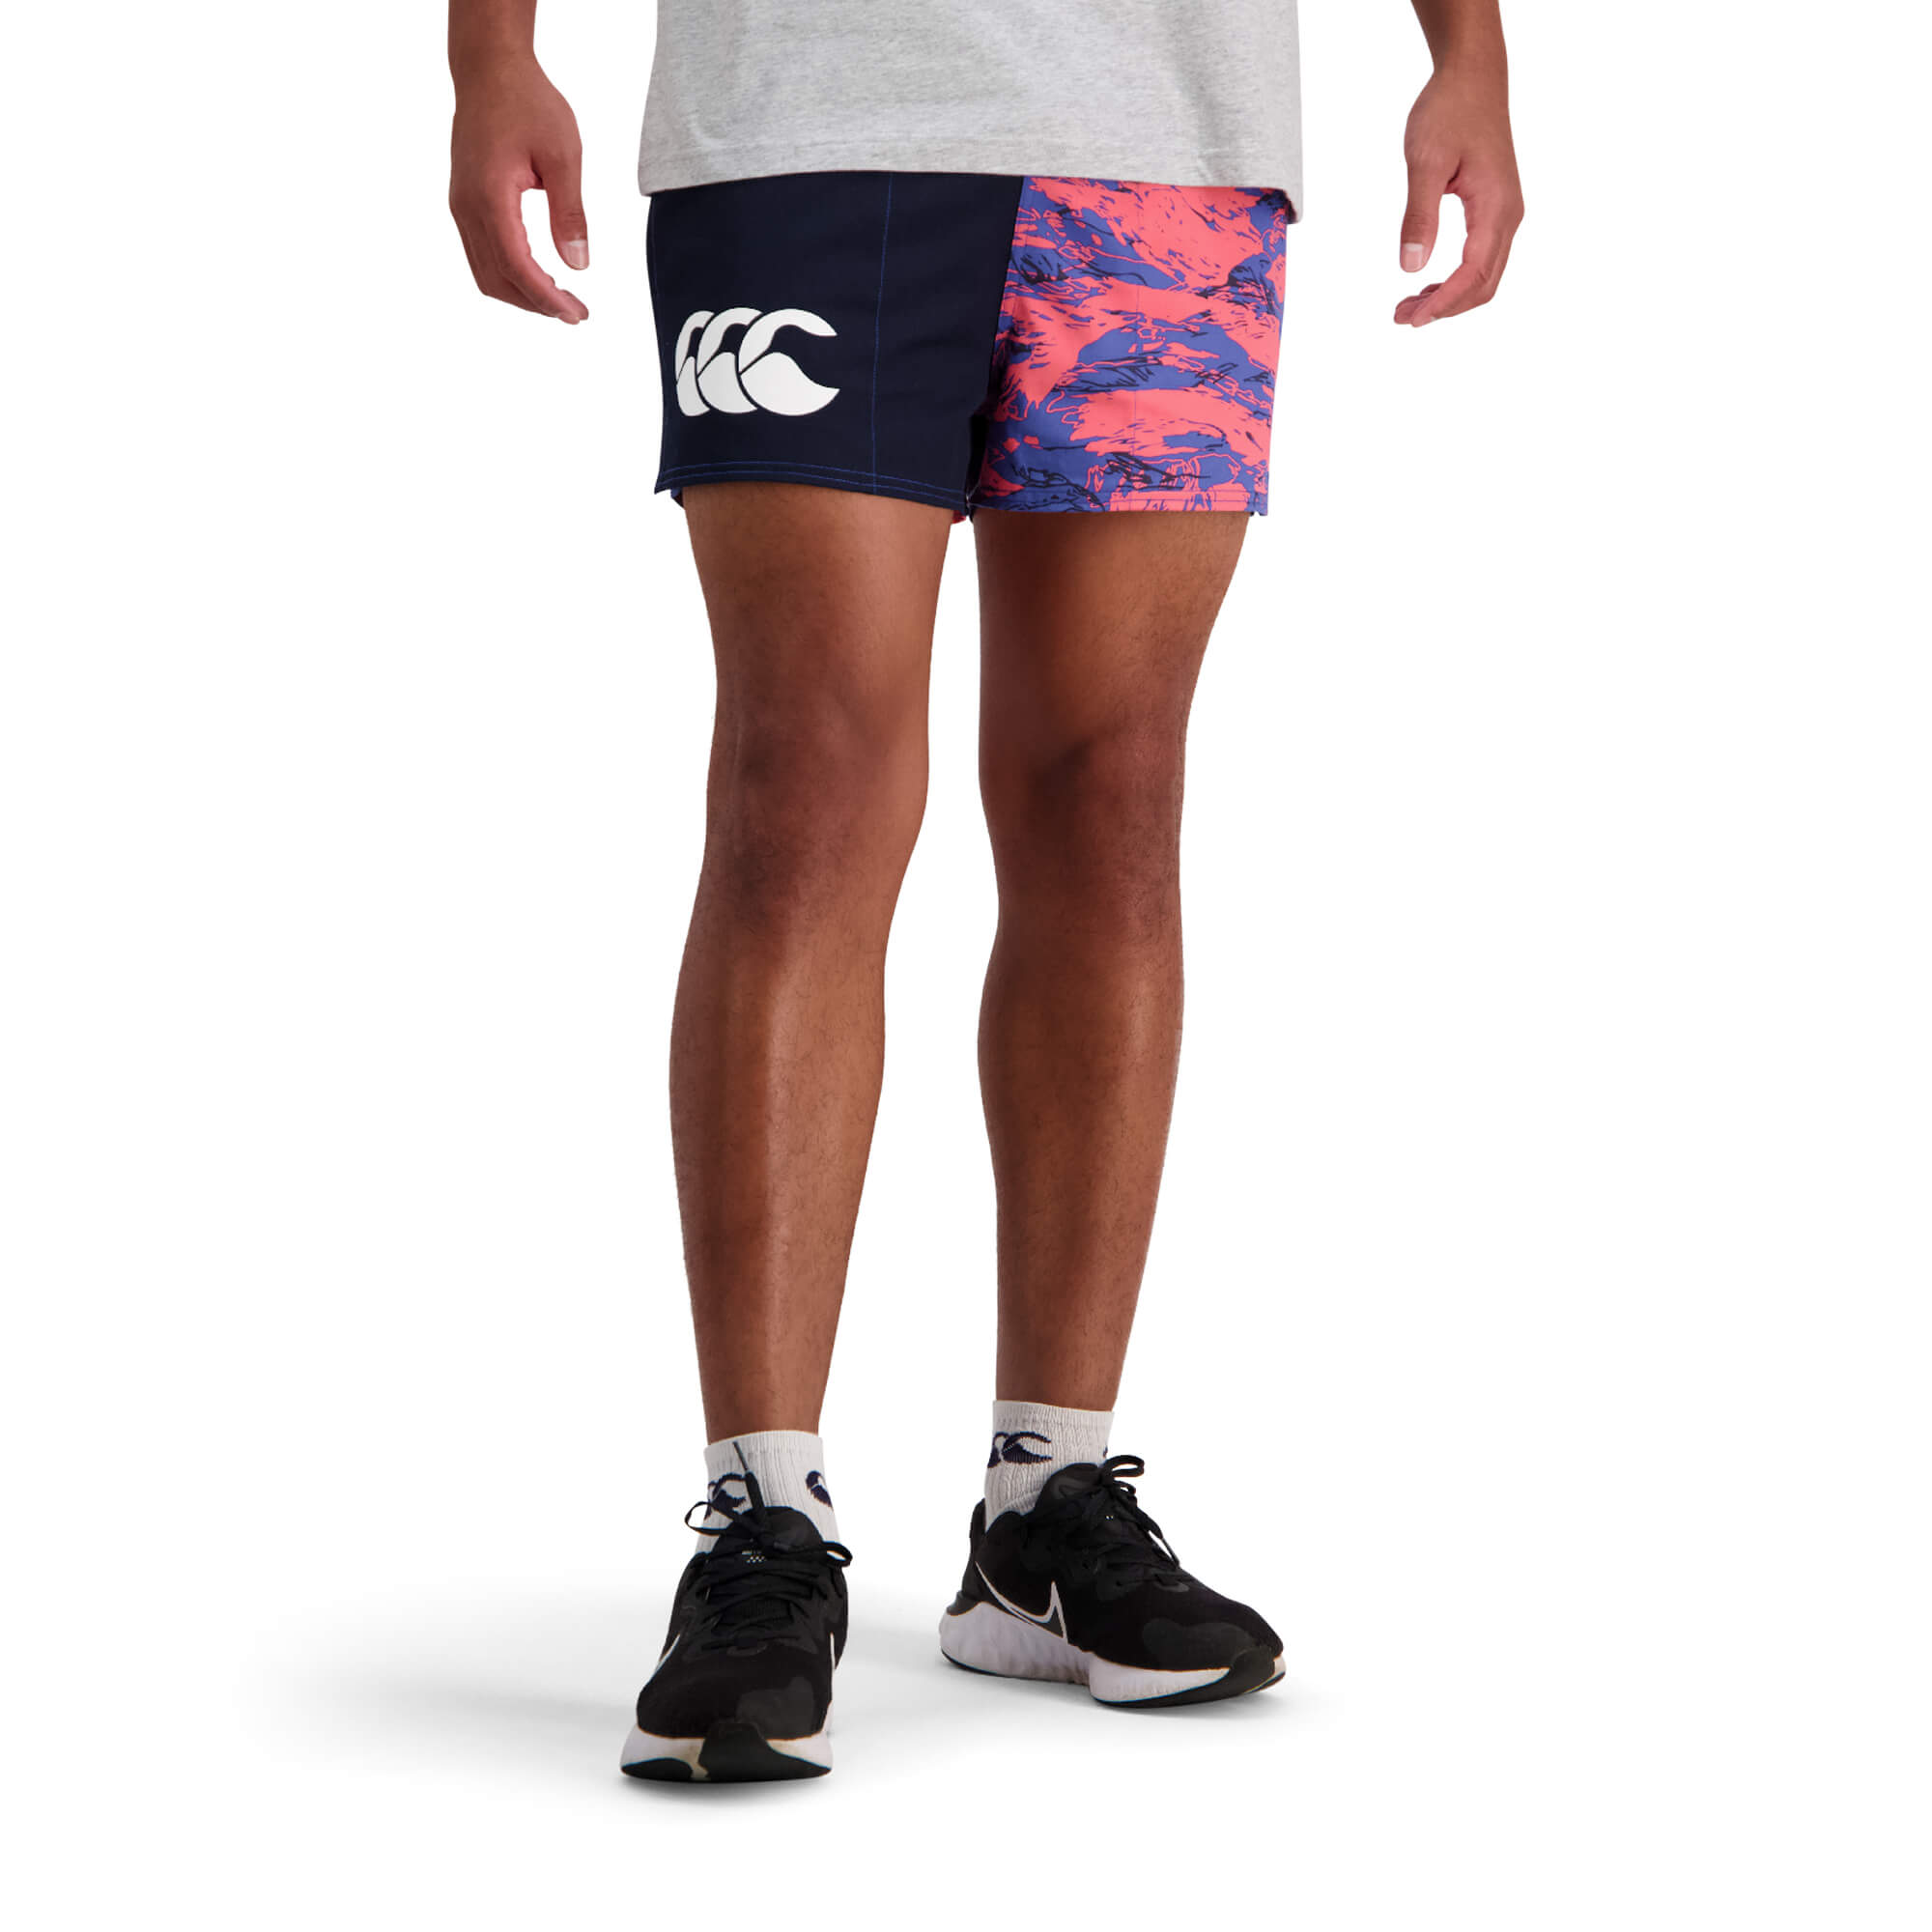 Canterbury Harlequin Shorts | Canterbury Rugby Clothing for Farmers